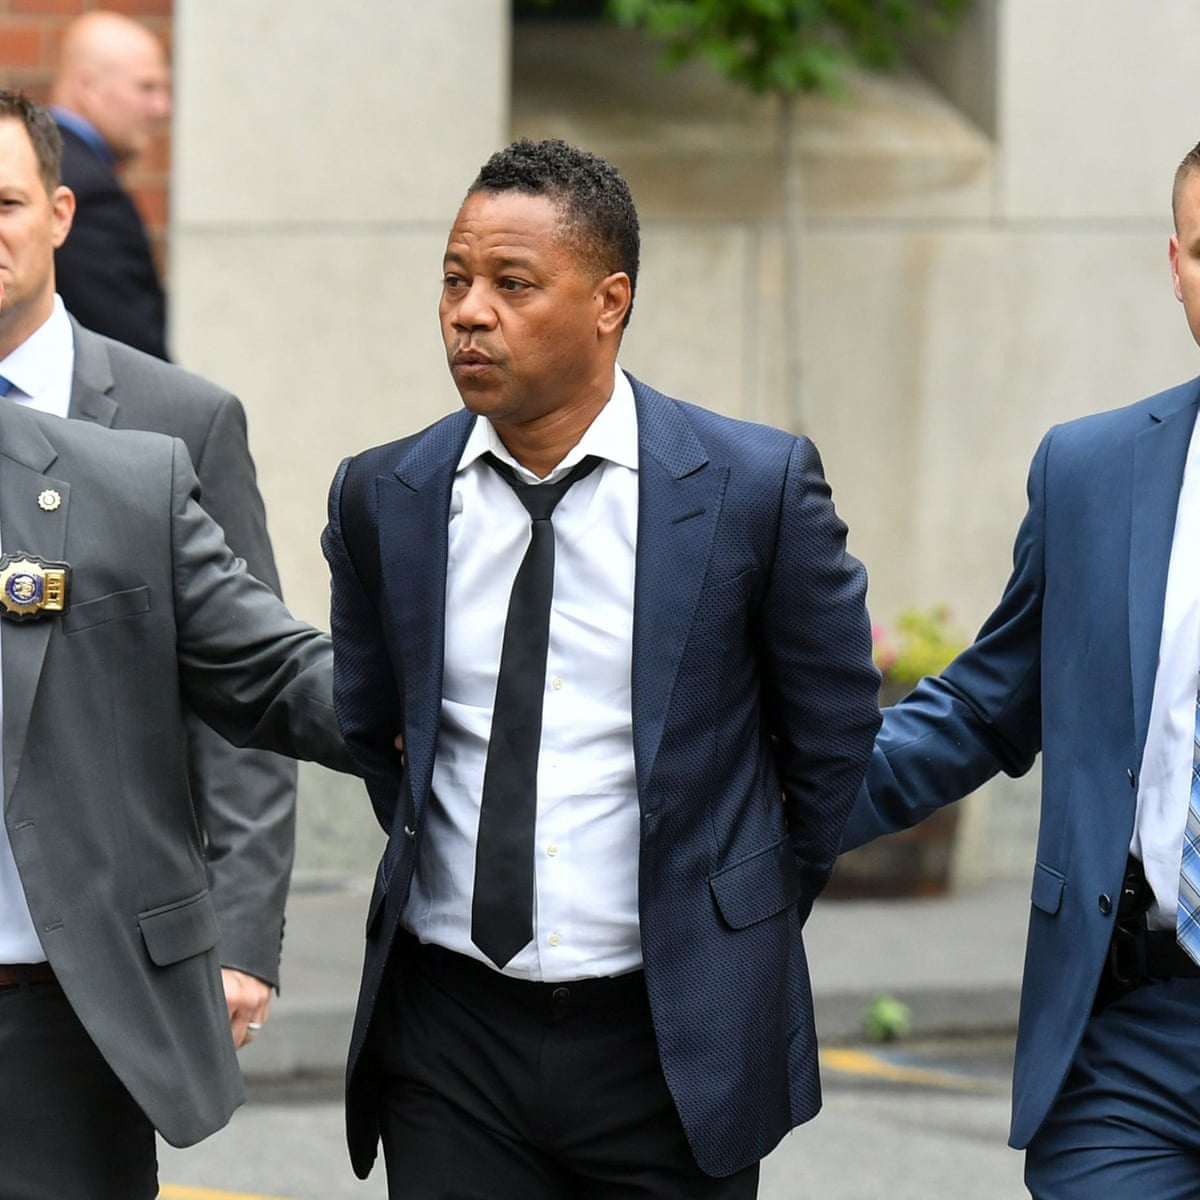 Cuba Gooding Jr charged with forcible touching after incident in New York | Cuba Gooding Jr | The Guardian